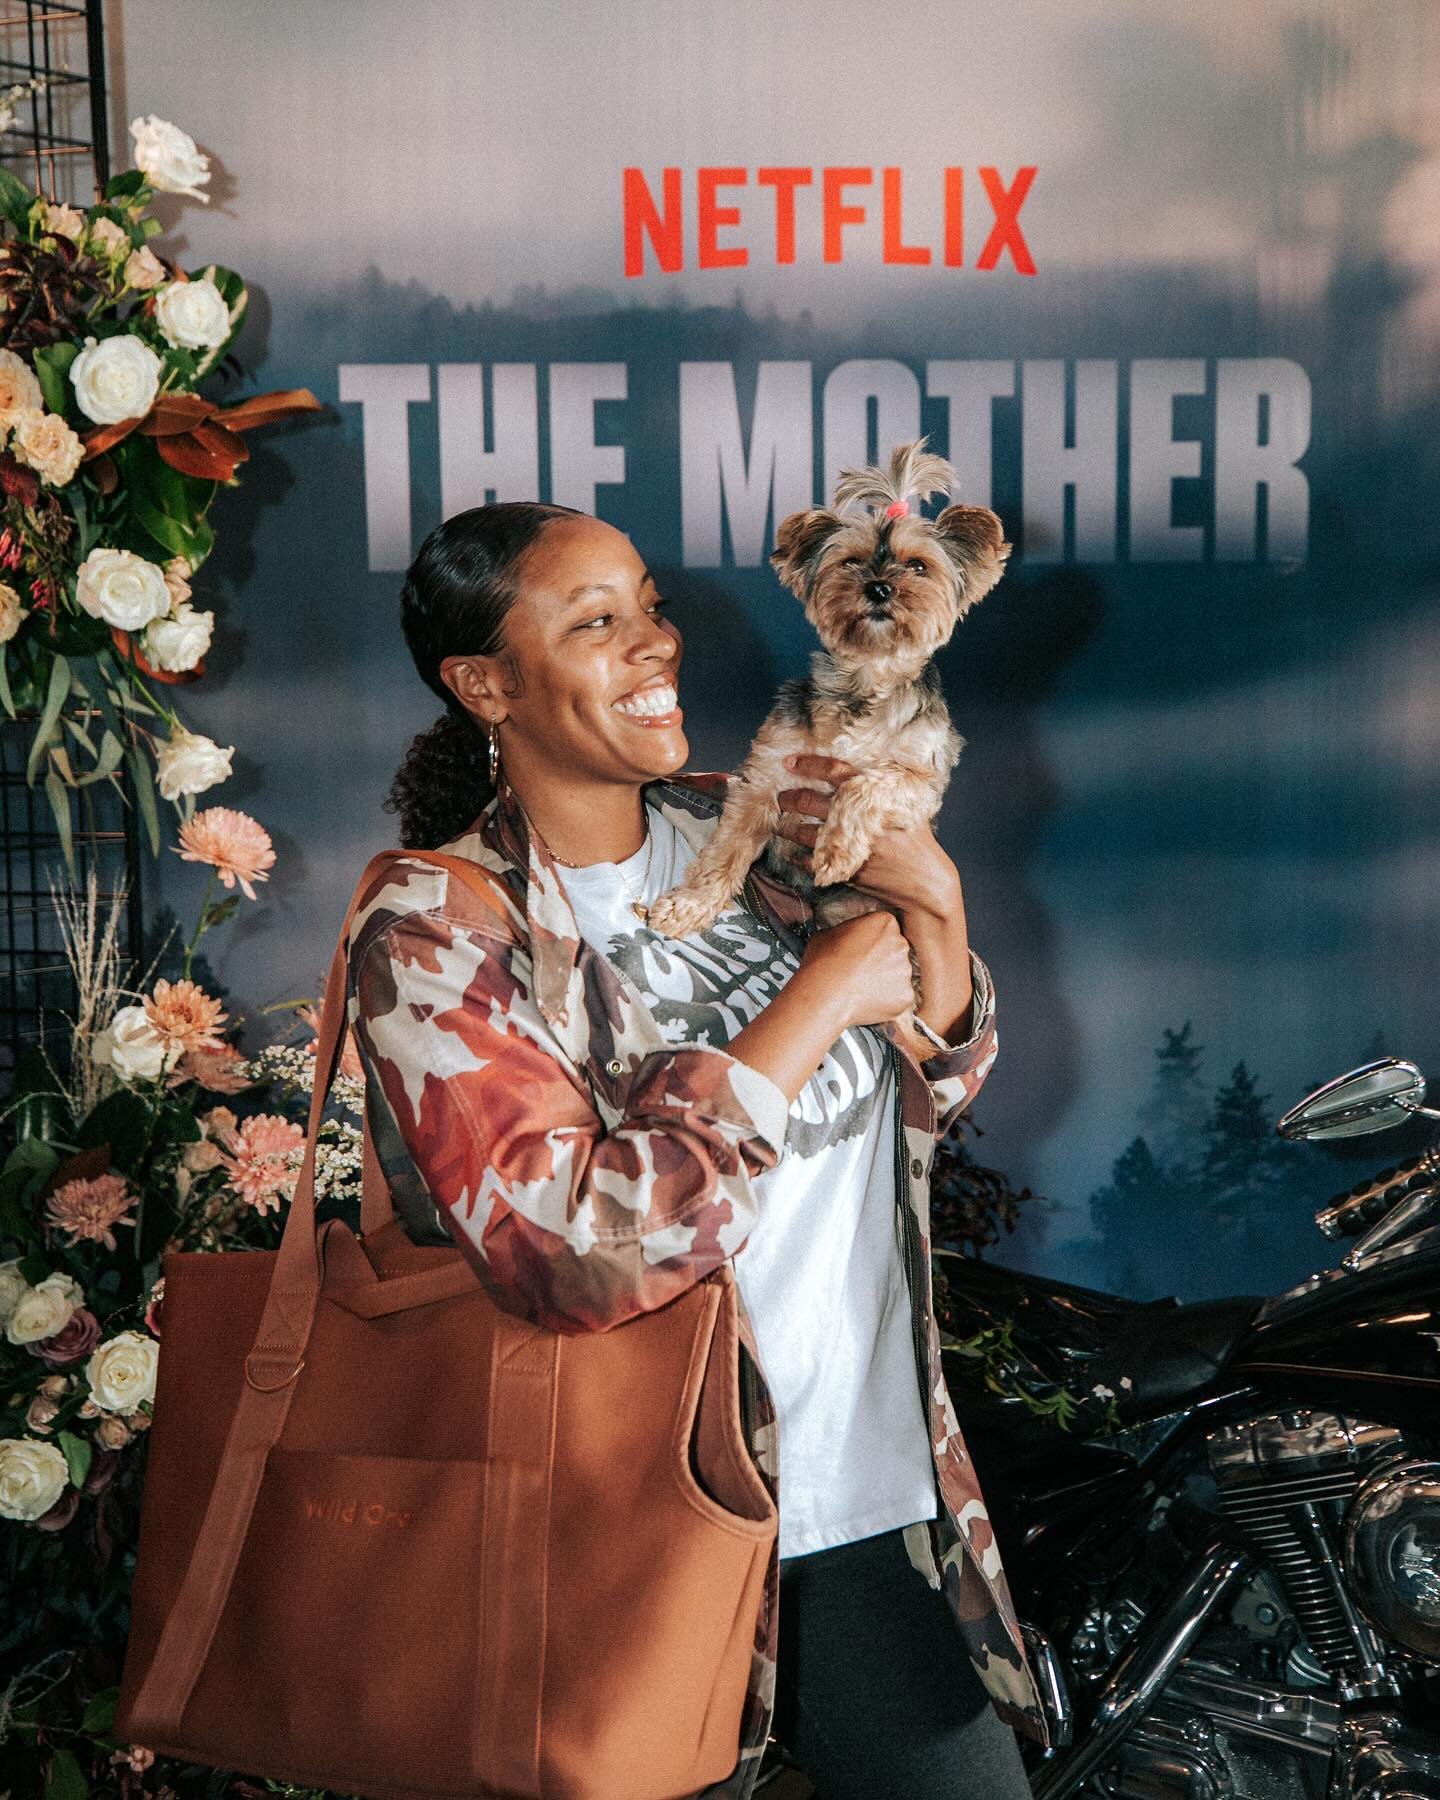 LOVE IS A MOTHER 💐

Throwback to shooting this cute Mother&rsquo;s Day pop up activation in Inglewood last year for @netflix x @rockpluspaper 📸

#eventphotographers #popupevent #netflix #inglewood #losangelesevents #eventphotos